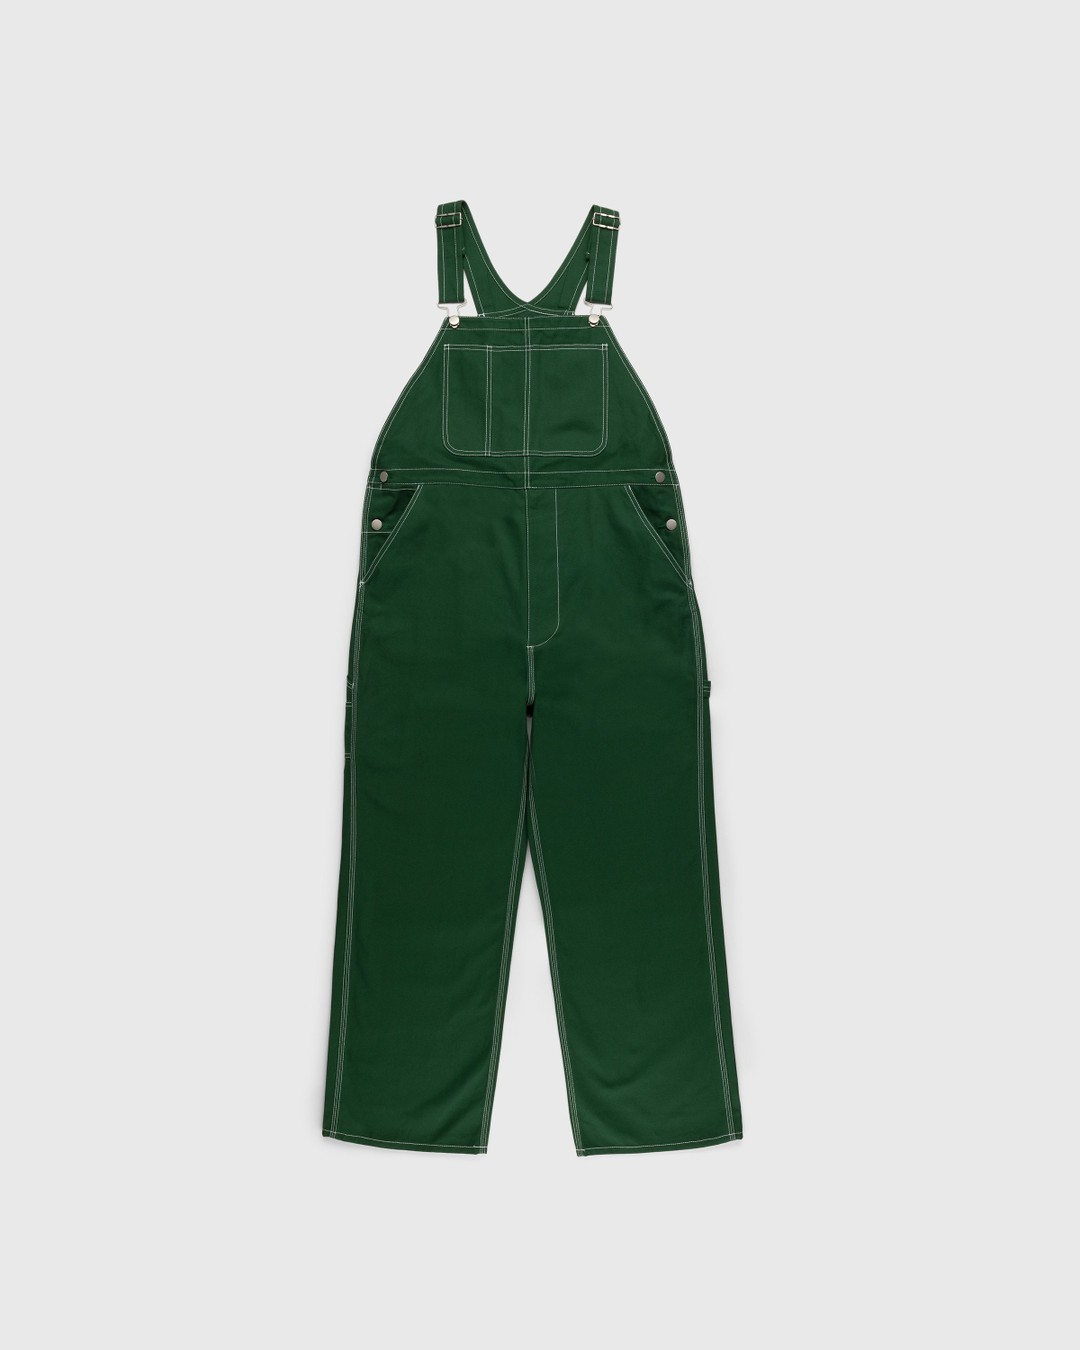 RUF x Highsnobiety – Cotton Overalls Green - Trousers - Green - Image 2